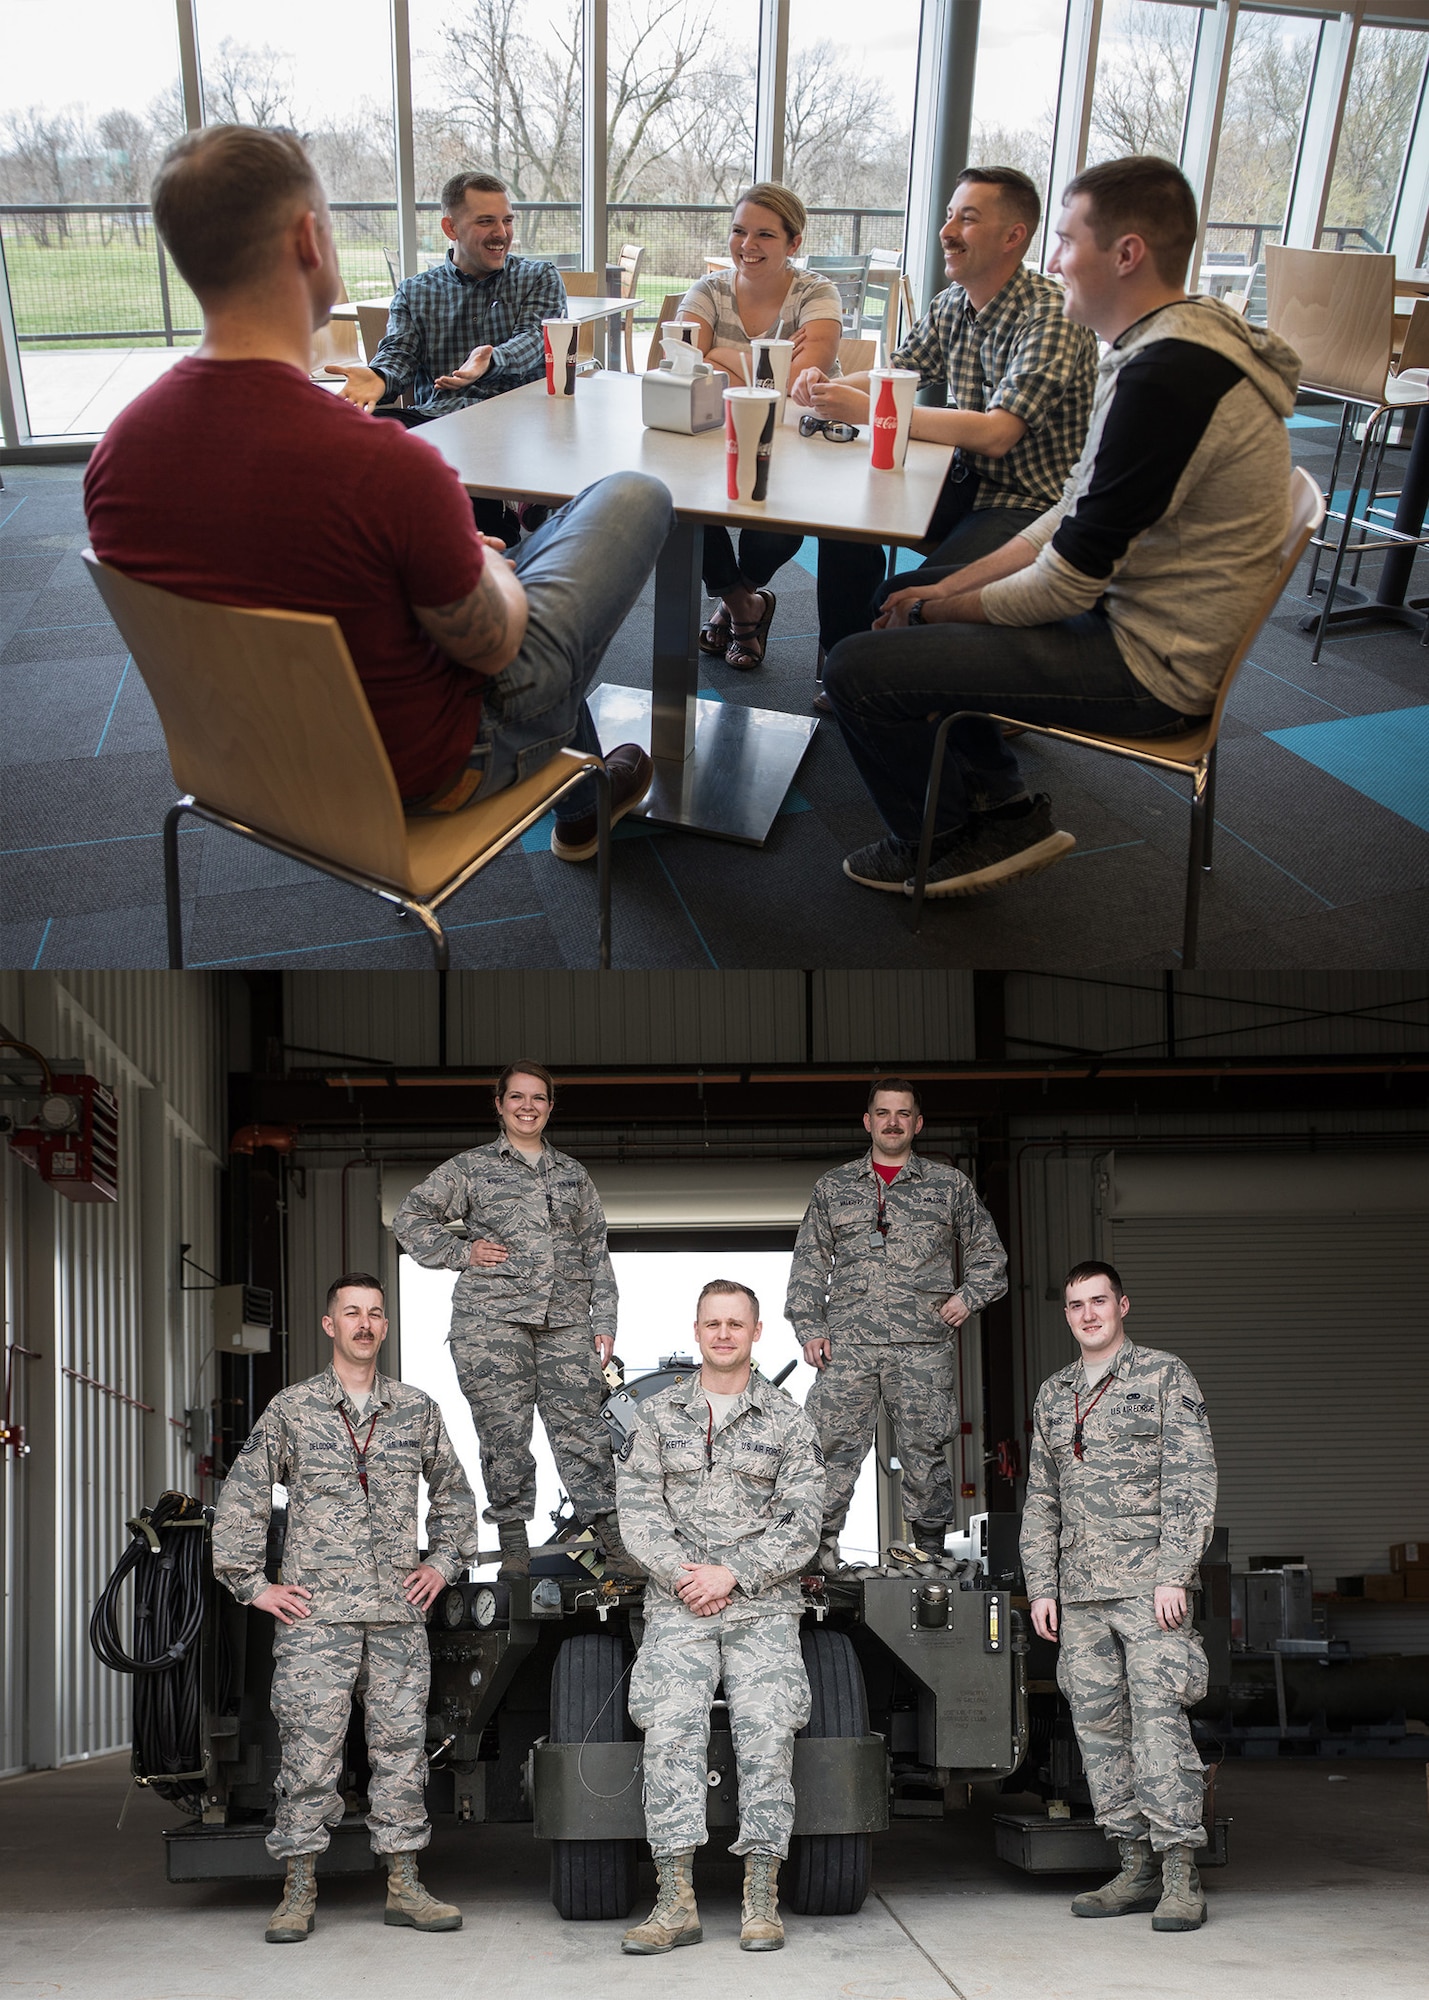 Two photos depicting Airmen from the 131st Bomb Wing both on and off the job.